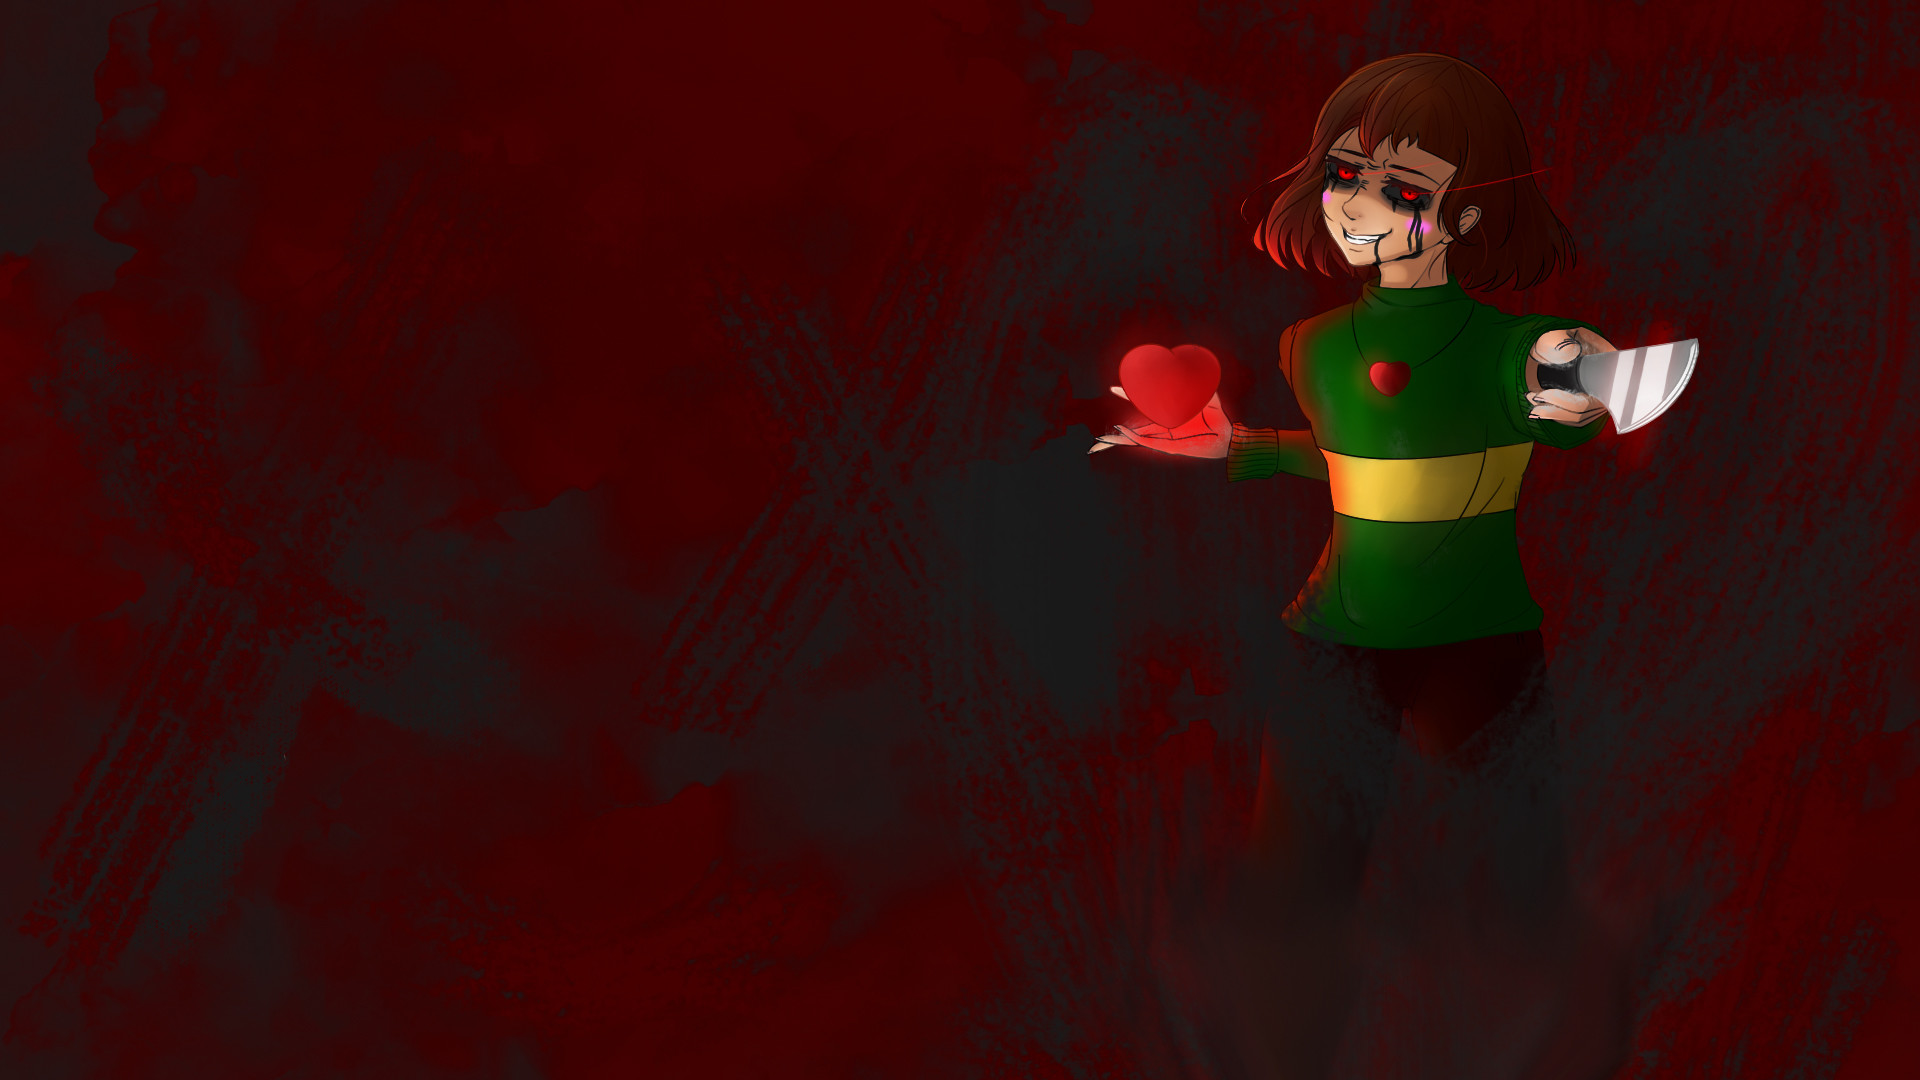 1920x1080 Chara - The World is Ending (Undertale Wallpaper) by DigitalColdI on .